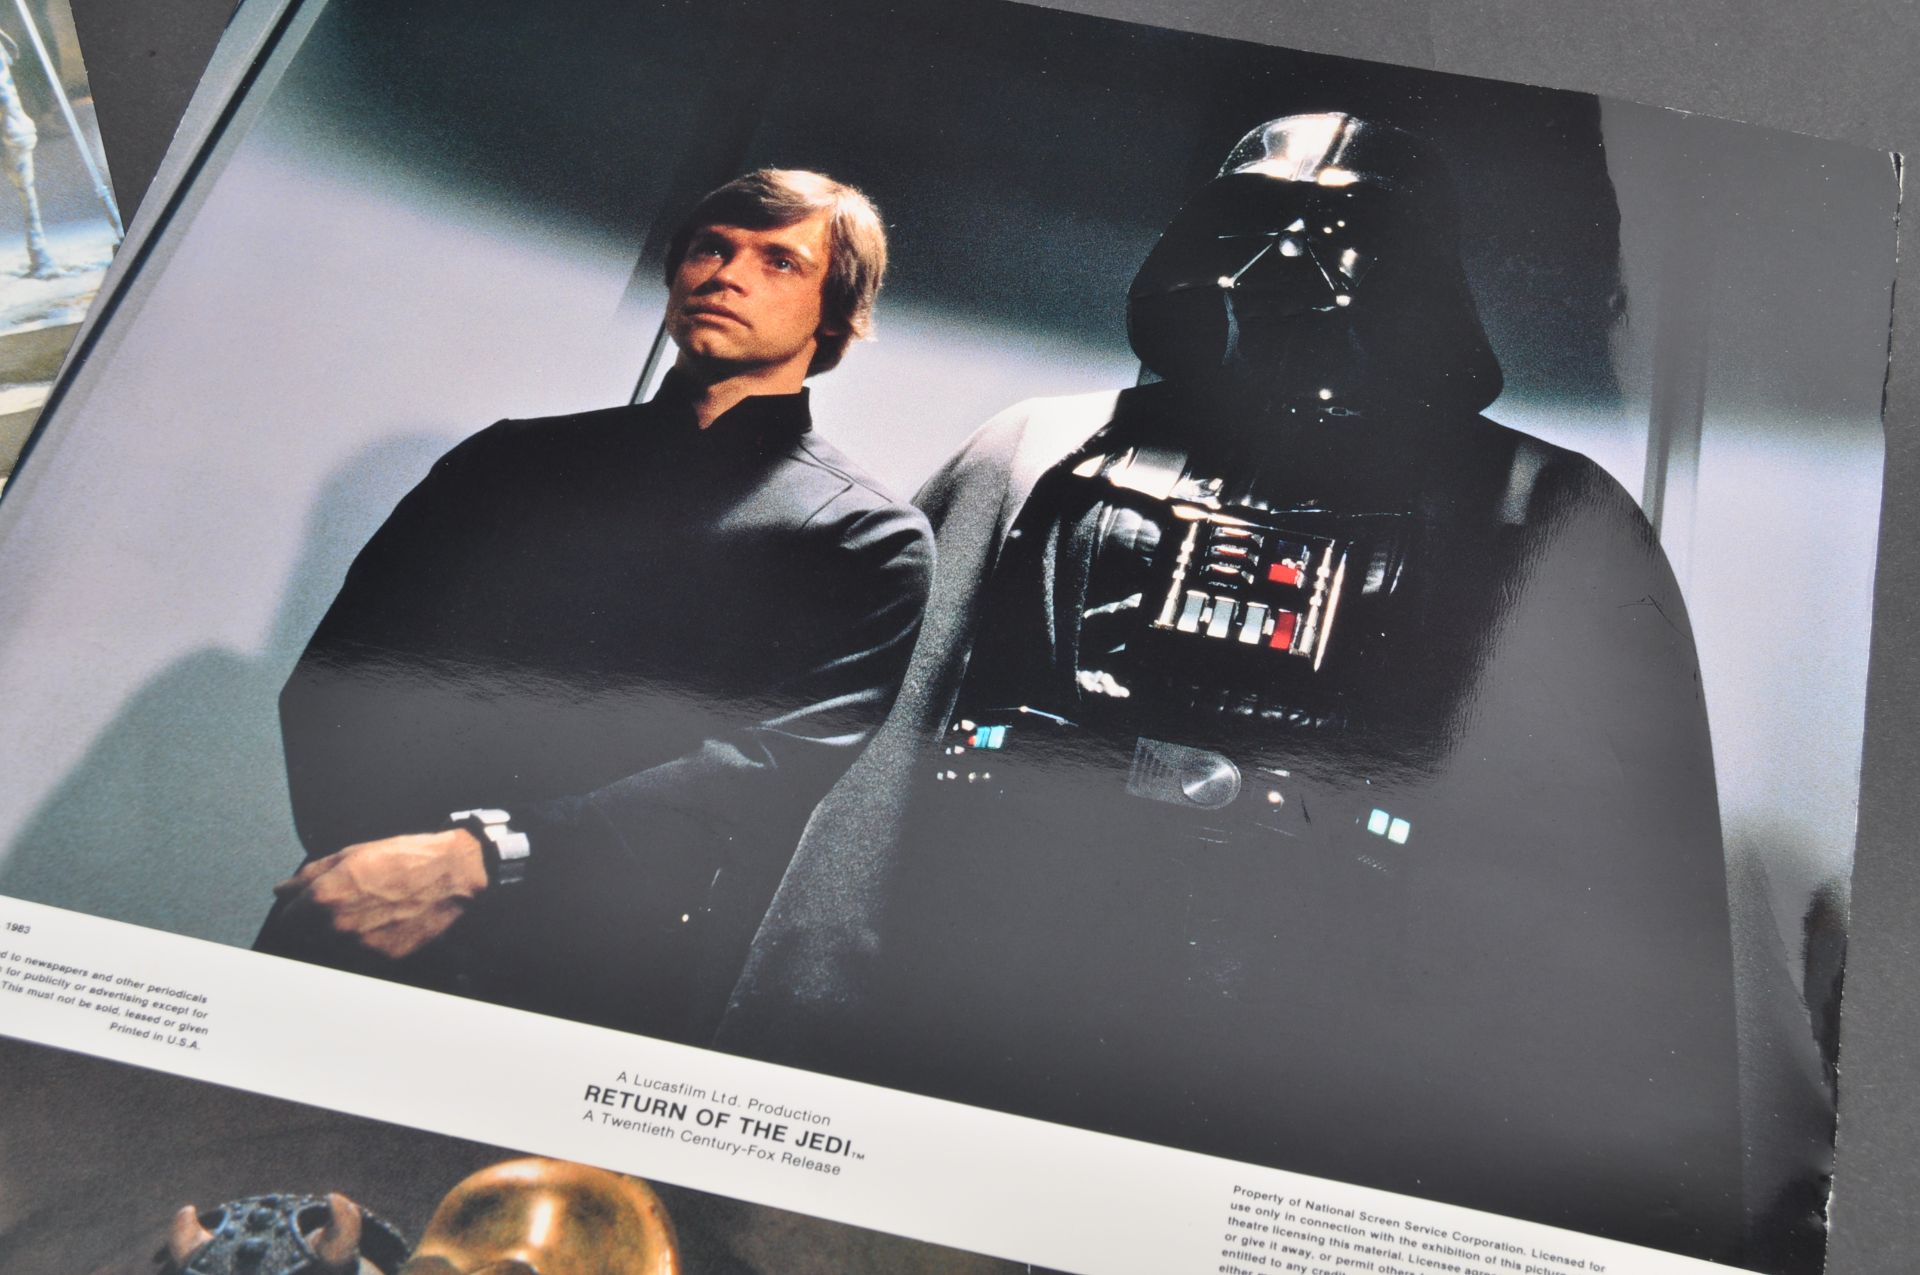 ESTATE OF DAVE PROWSE - RETURN OF THE JEDI SET OF LOBBY CARDS - Image 3 of 5